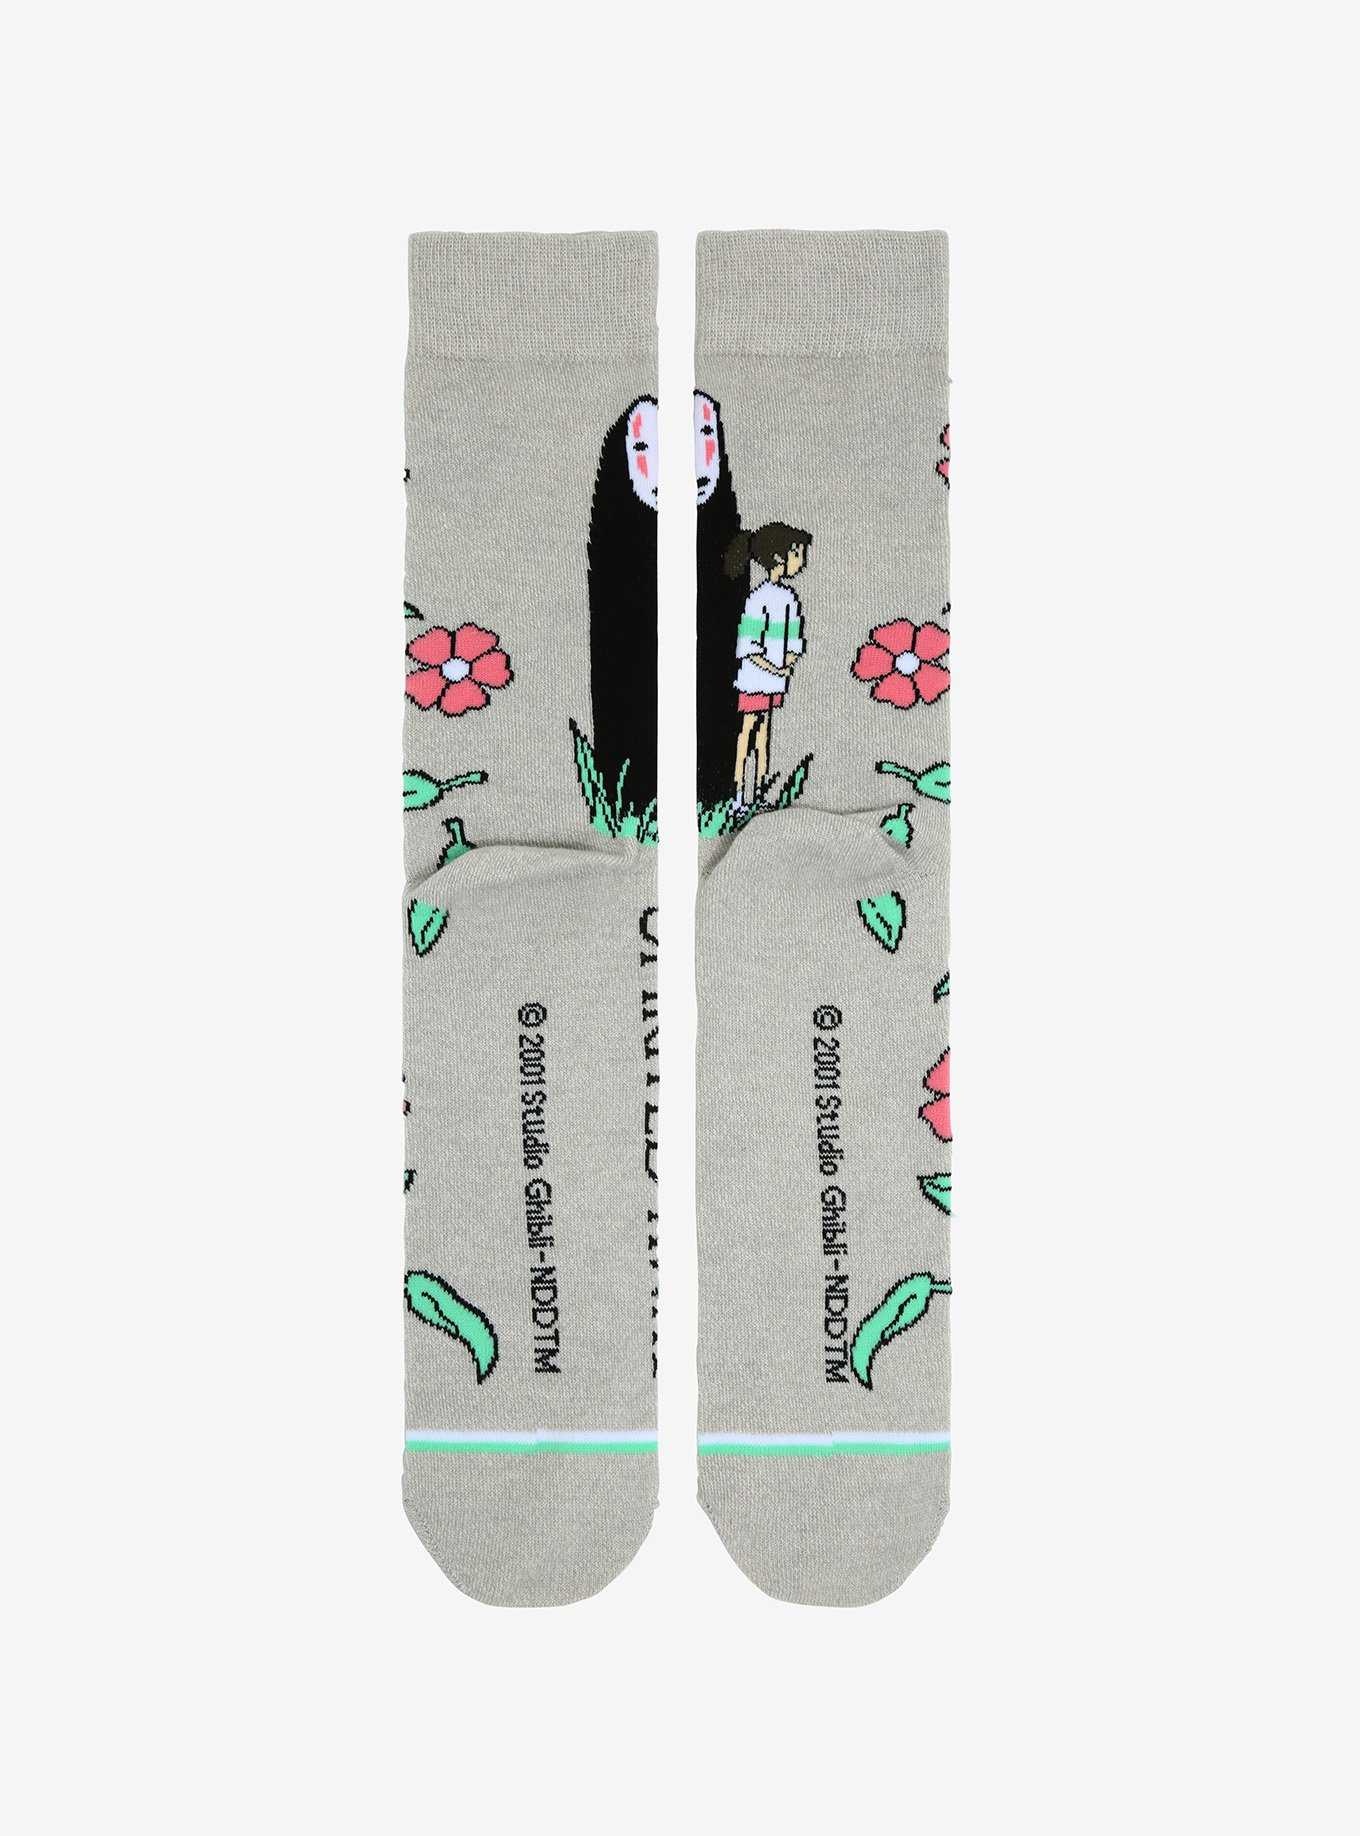 Studio Ghibli Spirited Away No-Face & Chihiro Floral Crew Socks - BoxLunch Exclusive, , hi-res